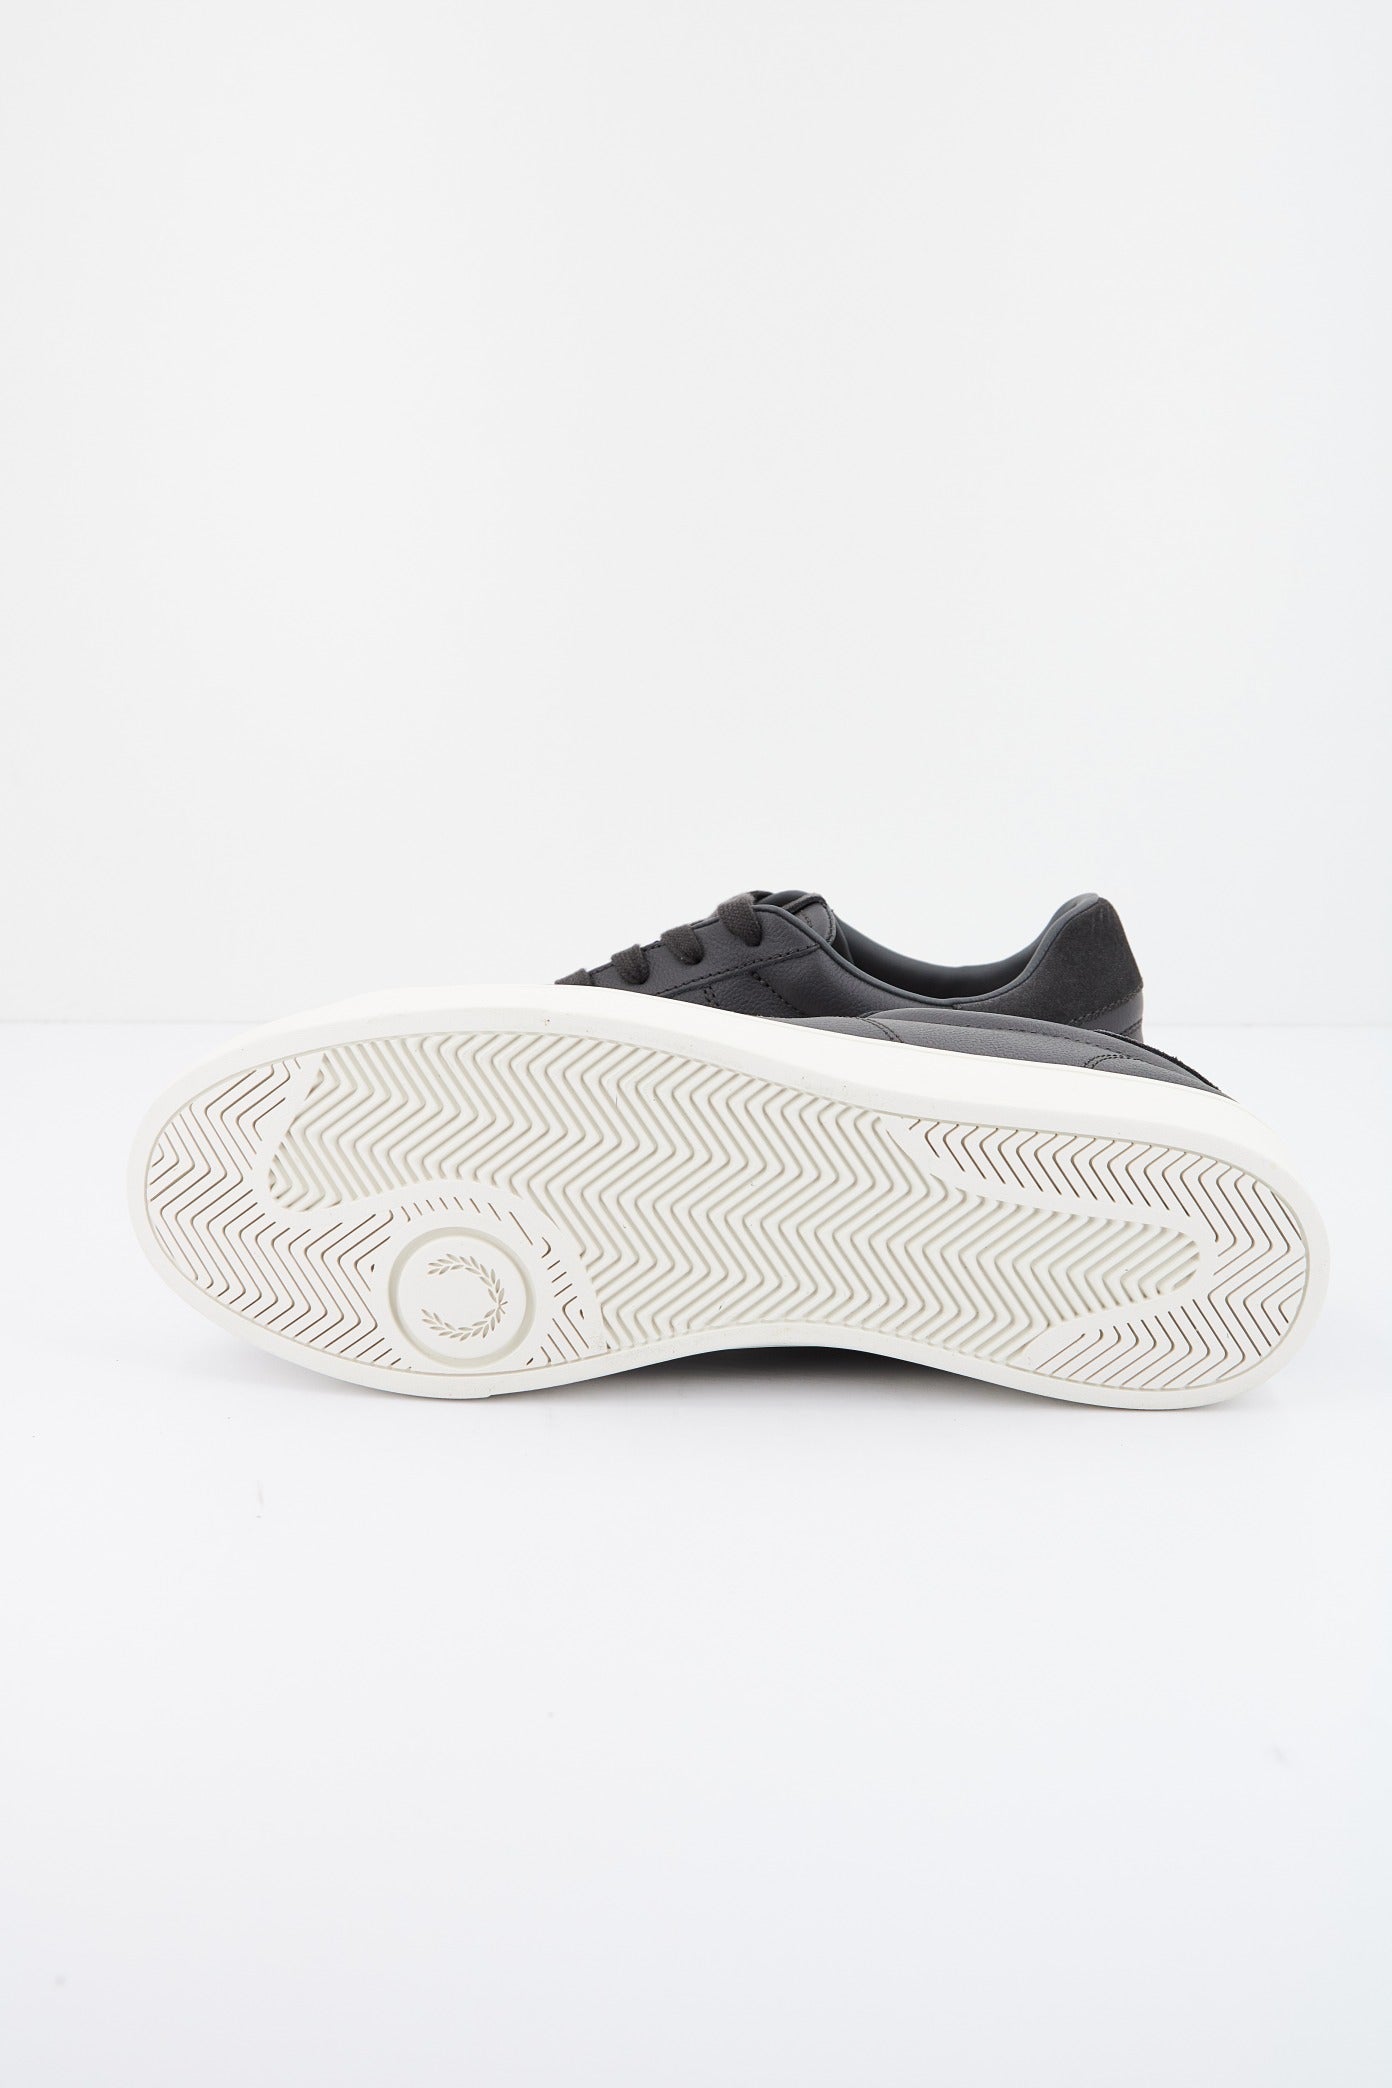 FRED PERRY SPENCER TUMBLED LTH en color GRIS  (4)